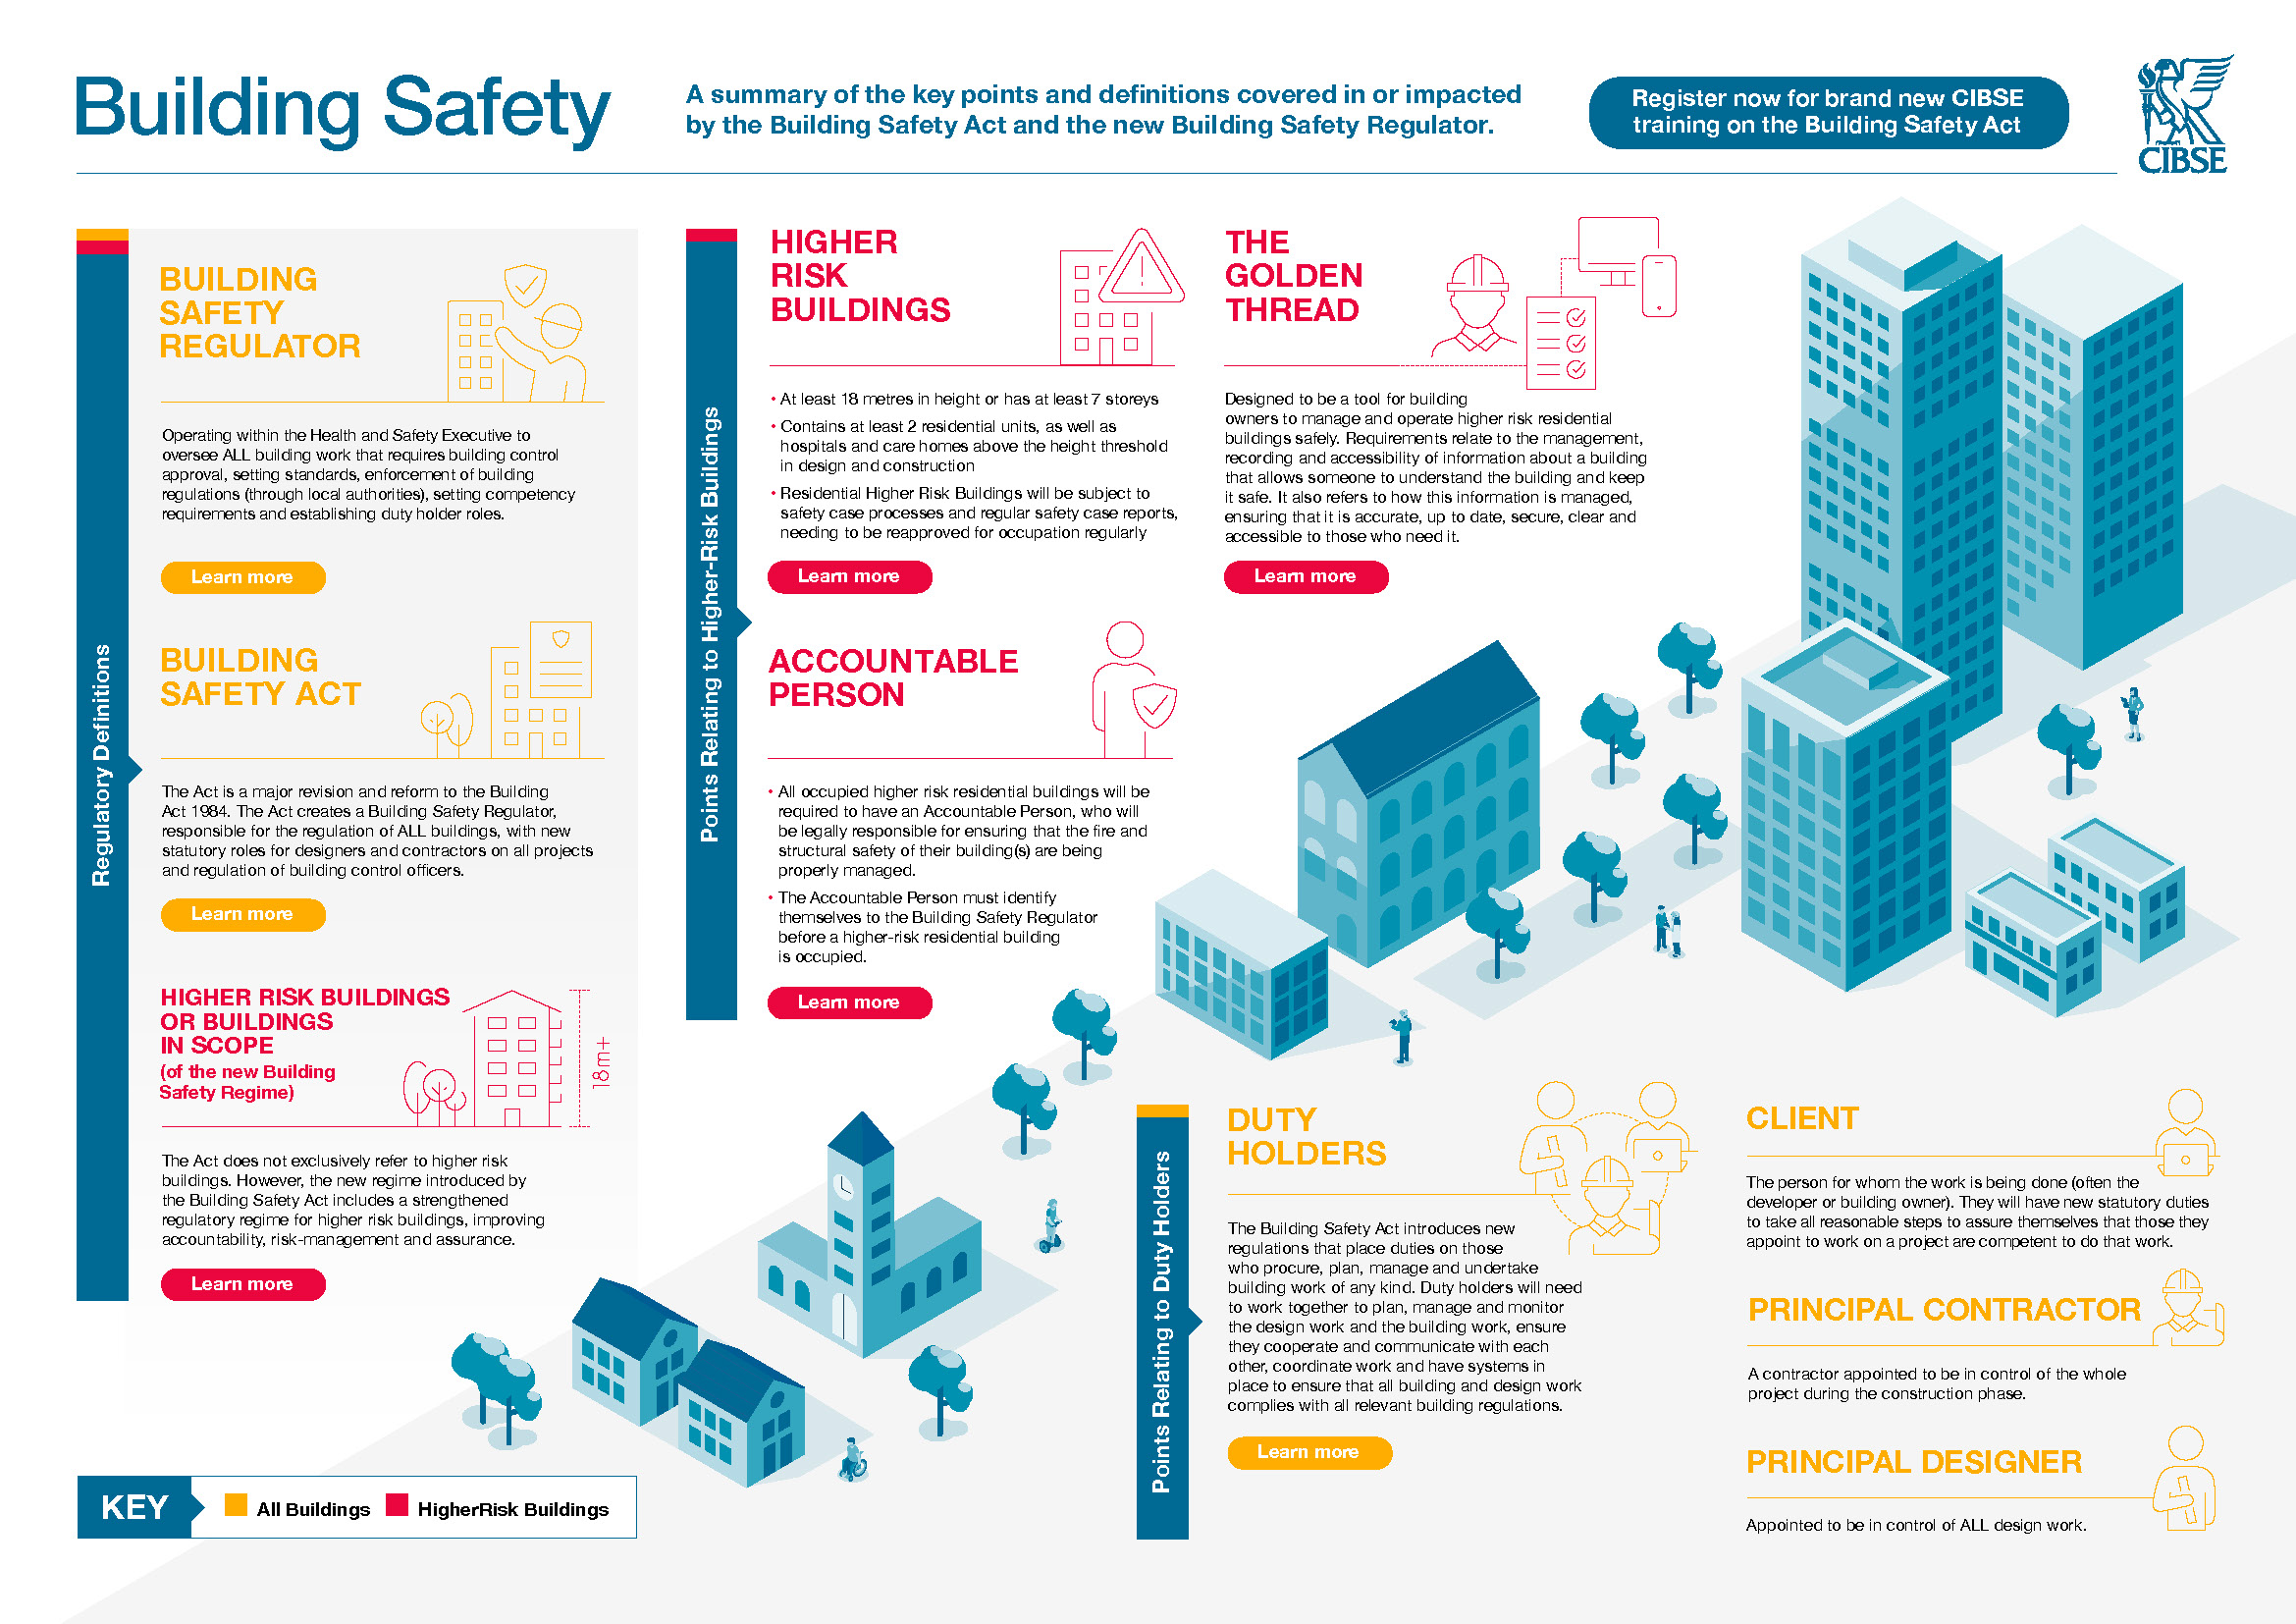 Building safety - a Summary of the key point and definitions covered in or impacted by the Building Safety Act and the new Building Safety Regulator.